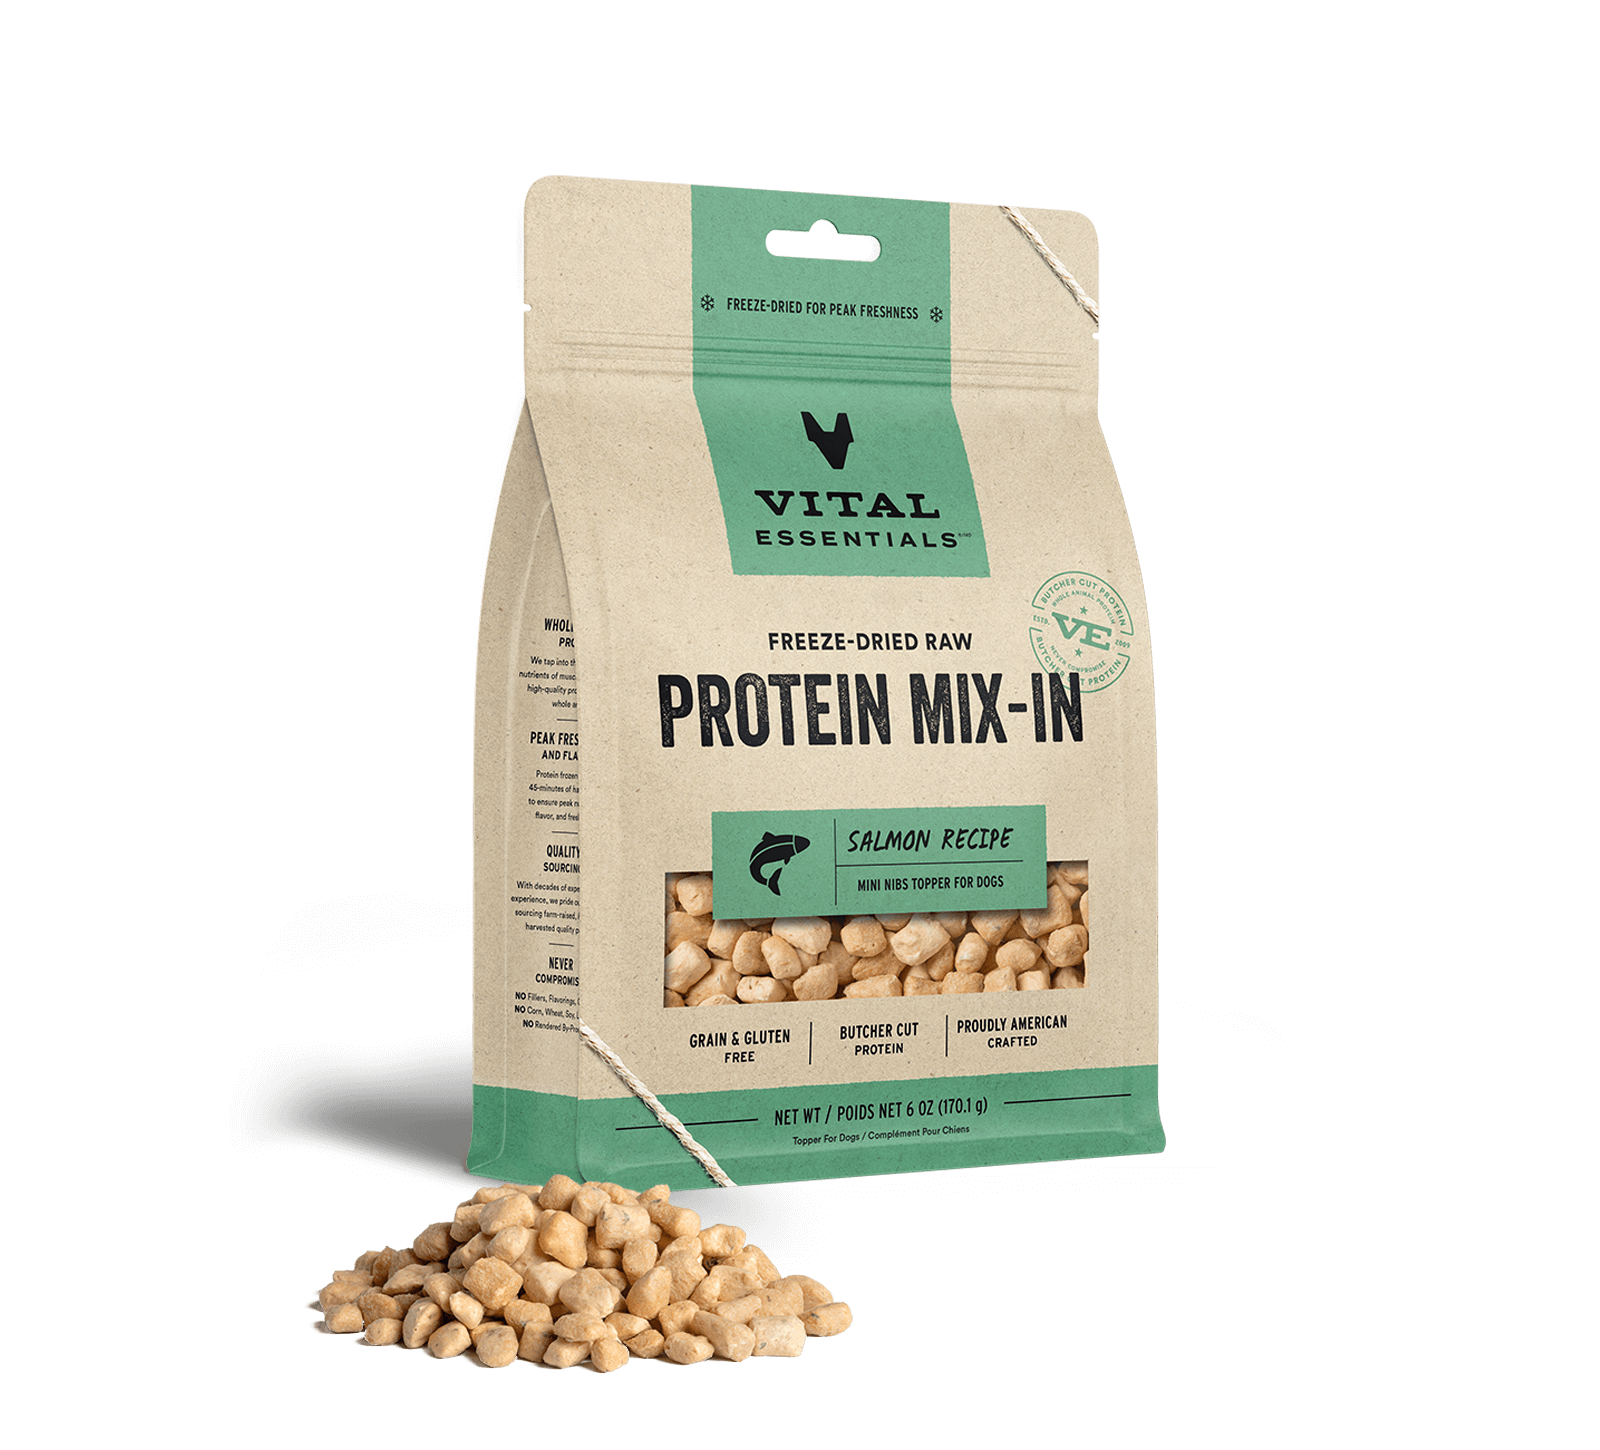 Vital Essentials Freeze-Dried Raw Protein Mix-In Salmon Recipe Mini Nibs Topper for Dogs, 6 oz - Items on Sale Now